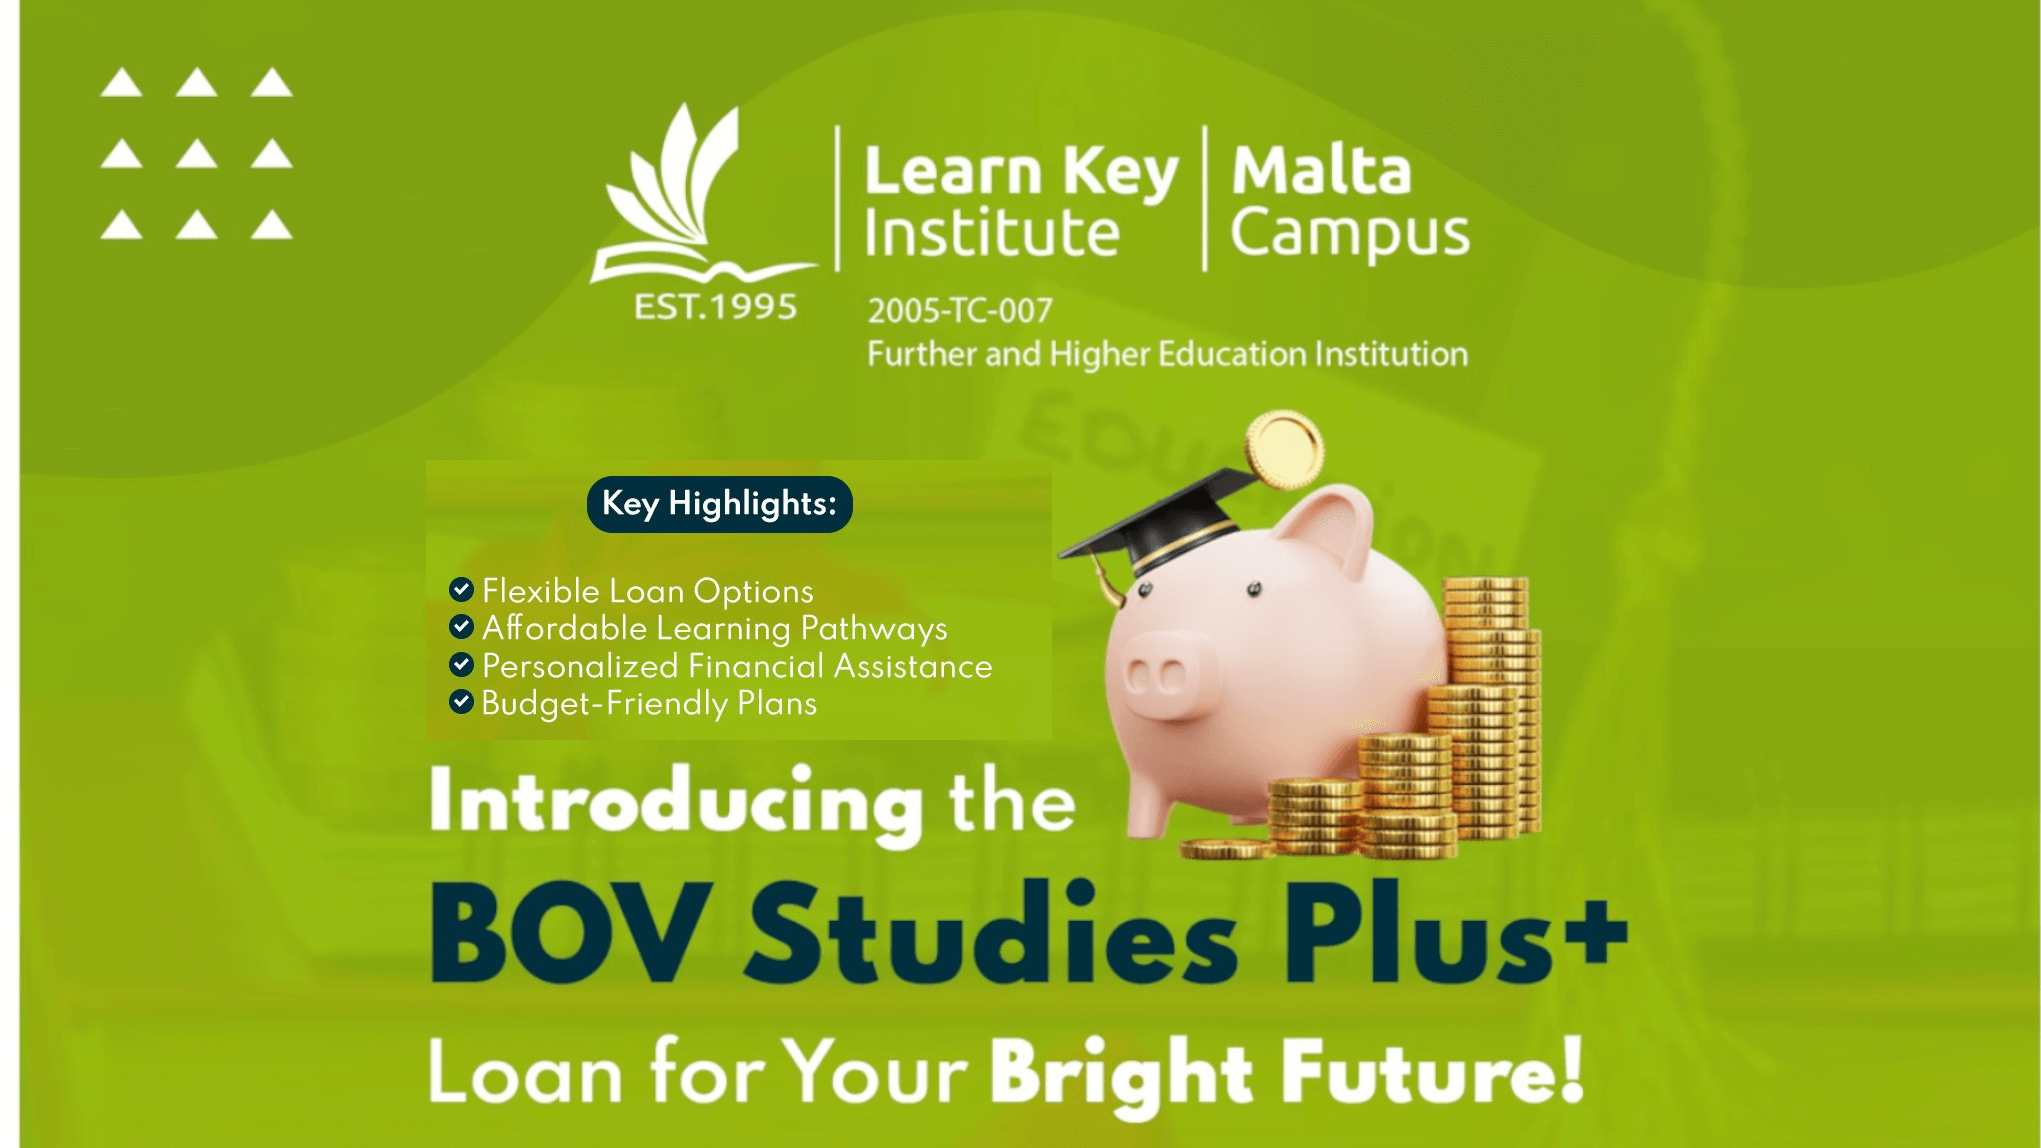 Exciting News! Introducing the BOV Studies Plus+ Loan